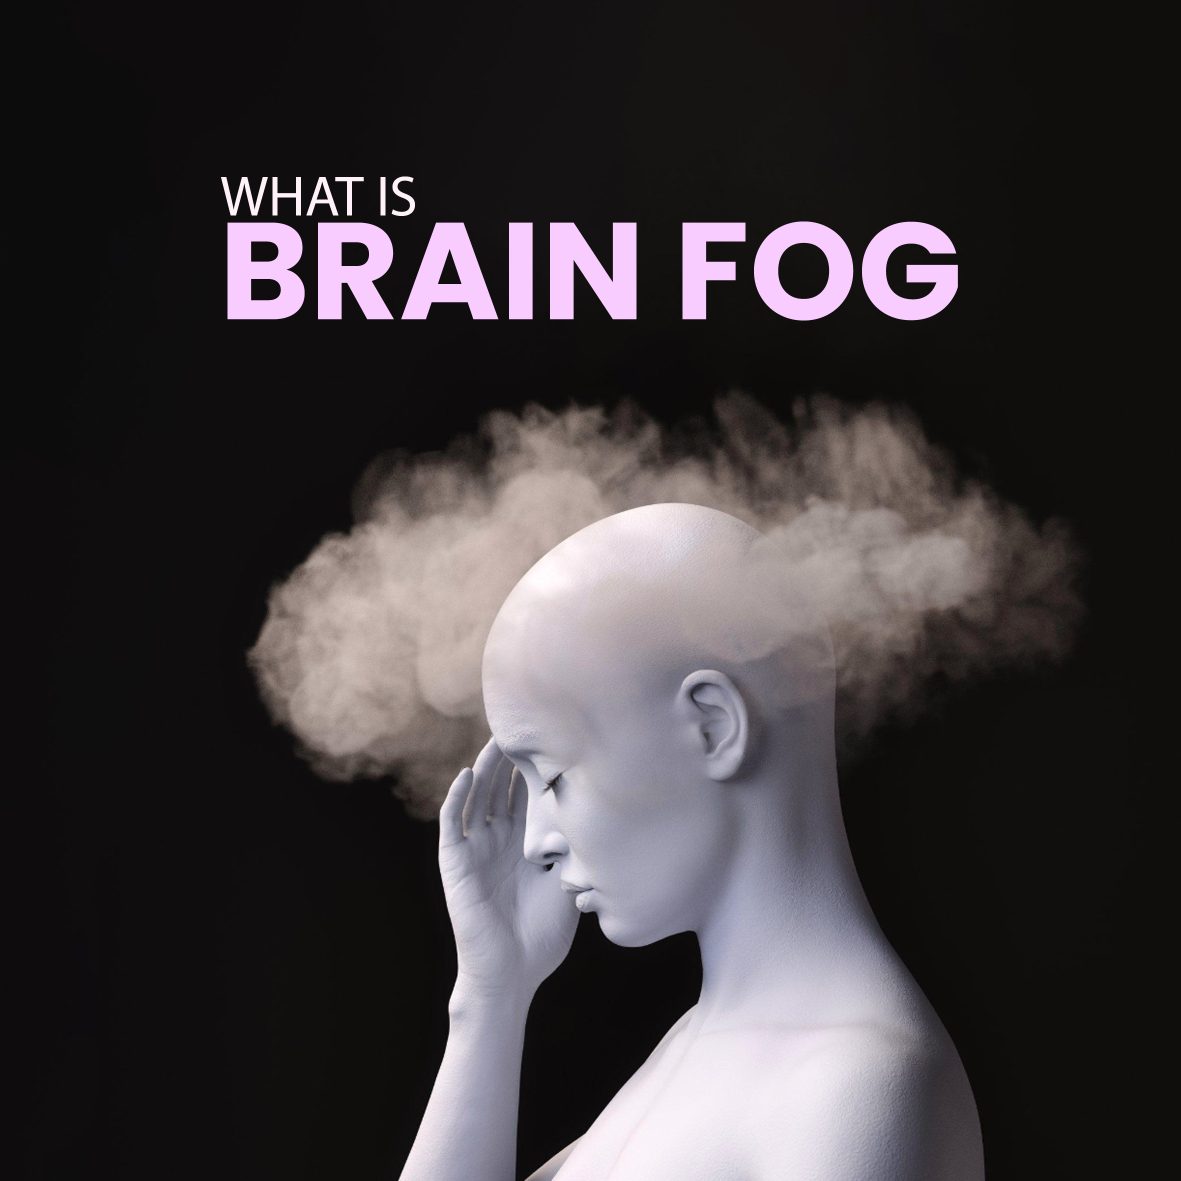 Brain Fog: What Is It? Symptoms, Causes, And Treatments